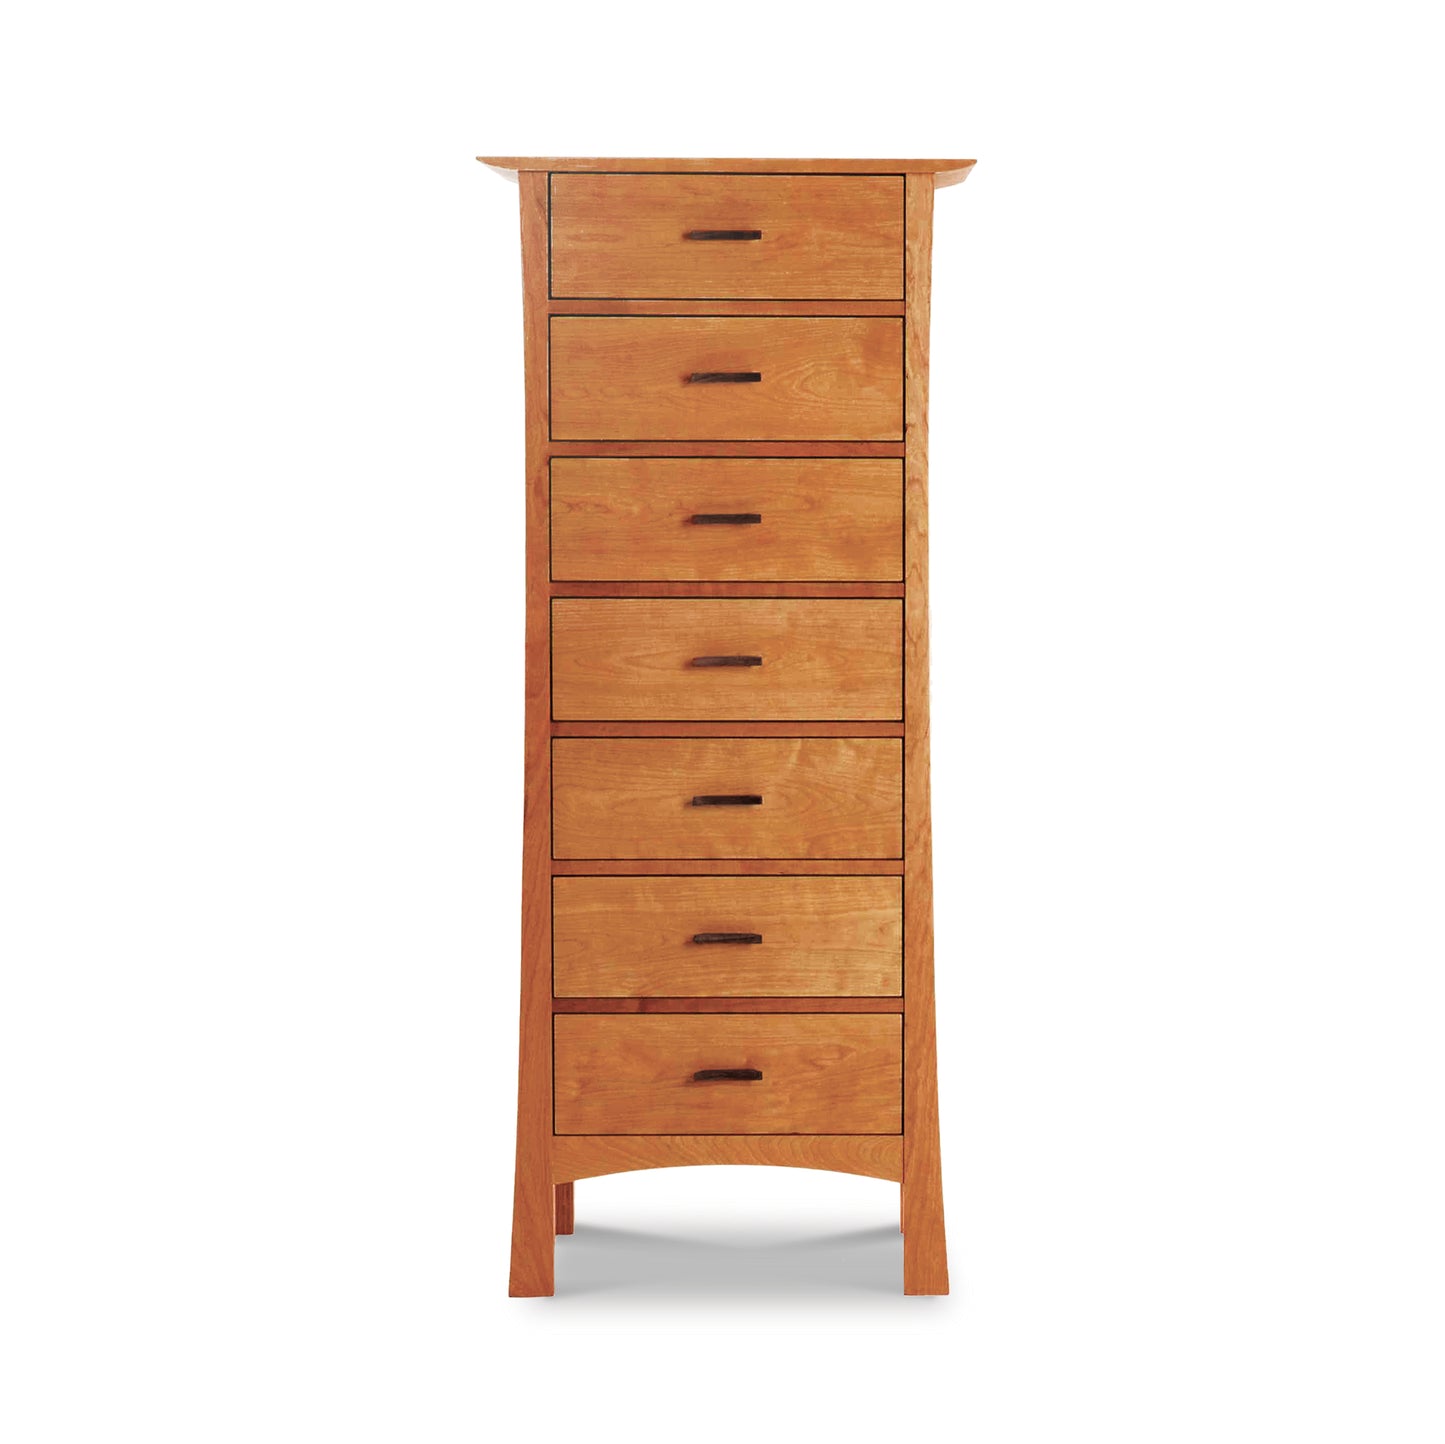 A tall Vermont Furniture Designs Contemporary Craftsman 7-Drawer Lingerie Chest, isolated on a white background.